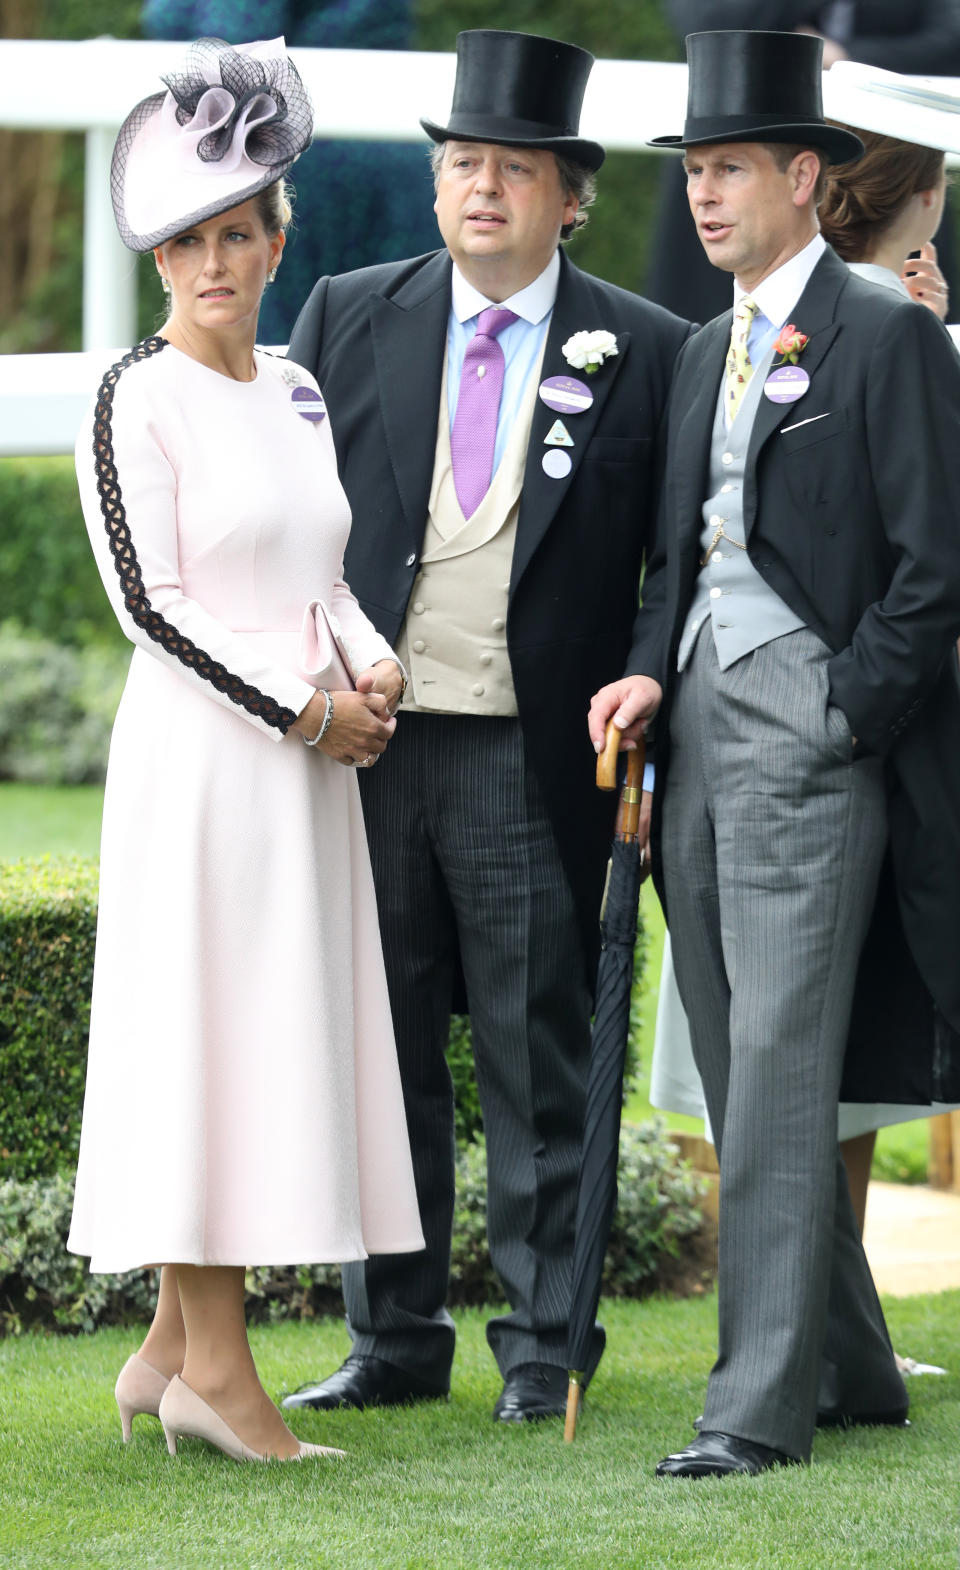 Sophie, Countess of Wessex and Prince Edward on day one of Royal Ascot 2018